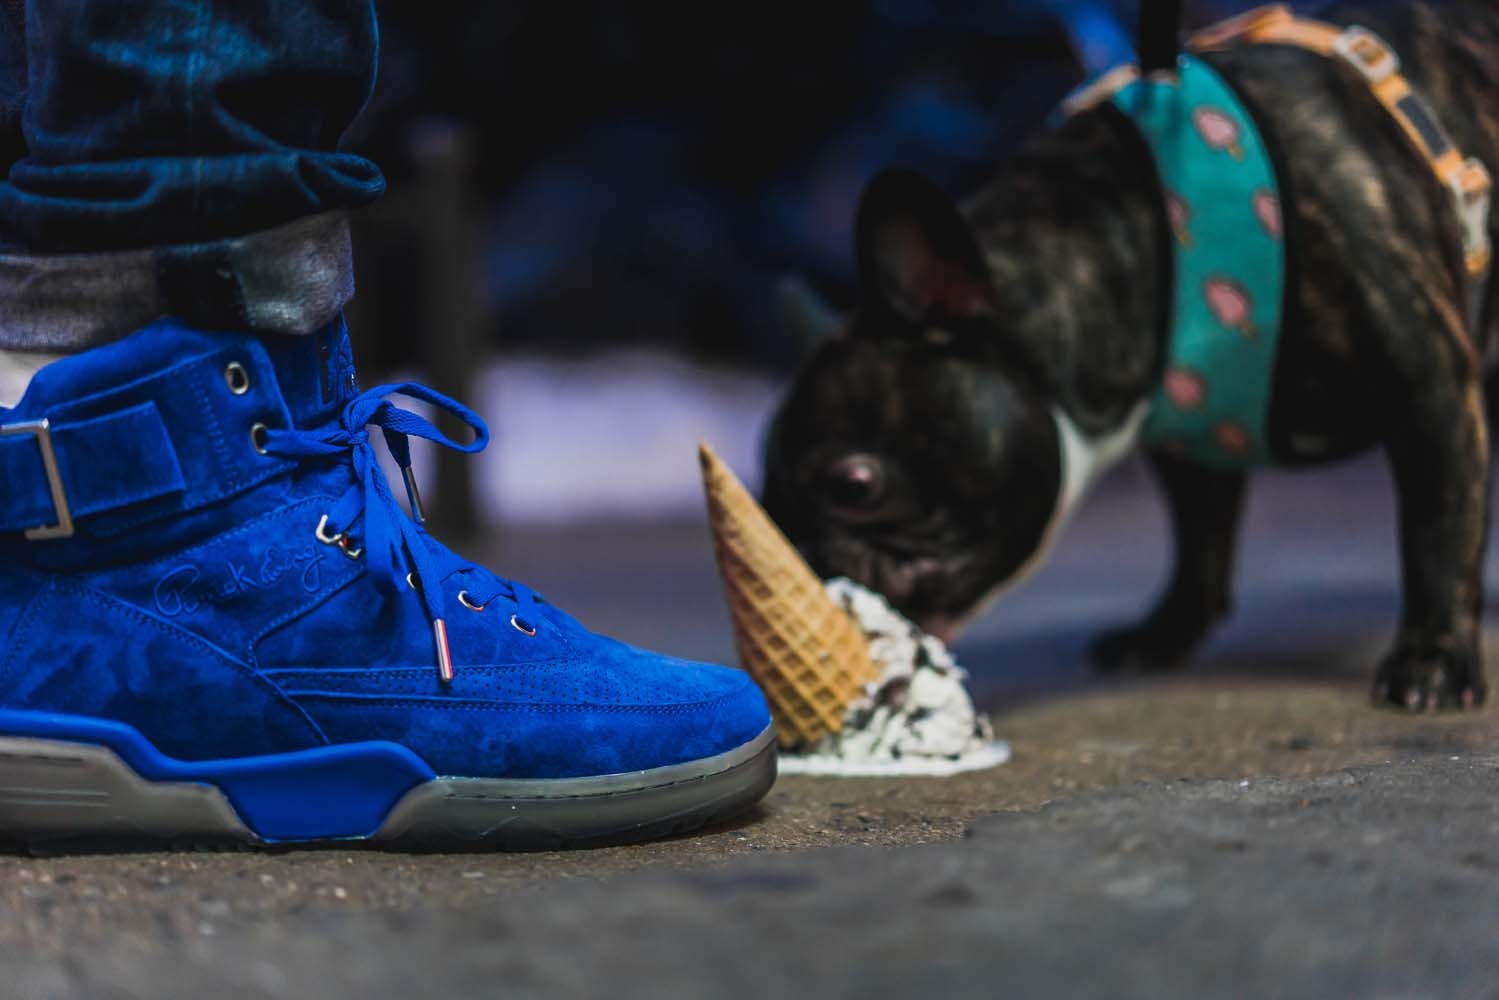 Ewing Athletics Mikey Likes It Ice Cream 33 Hi Harlem LES Patrick Chewing Blue Clear Sole